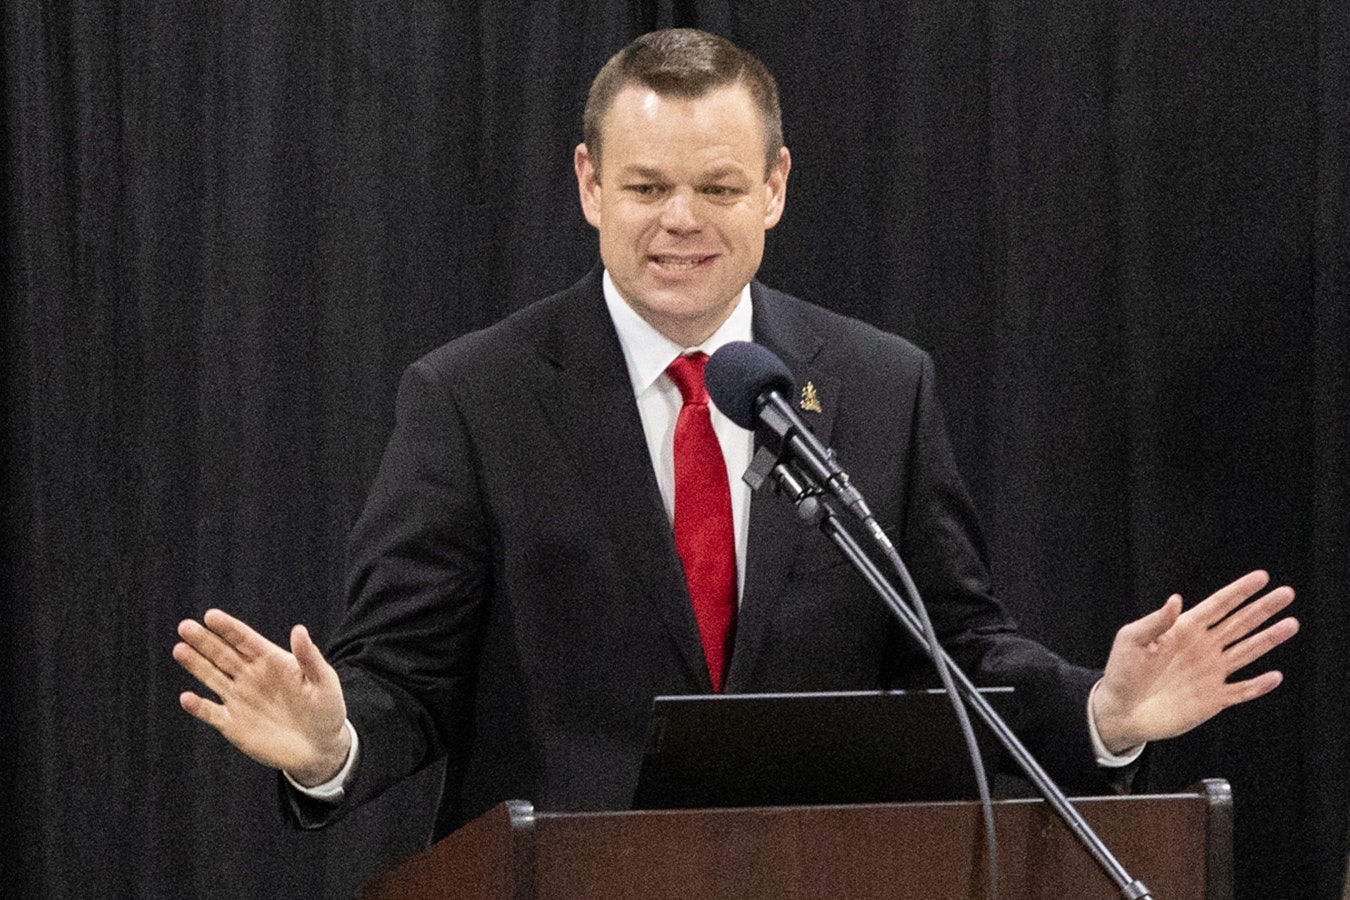 Republican candidate for Wyoming's U.S. Senate nomination, speaks during the 2024 Wyoming Republican Party convention in Cheyenne.